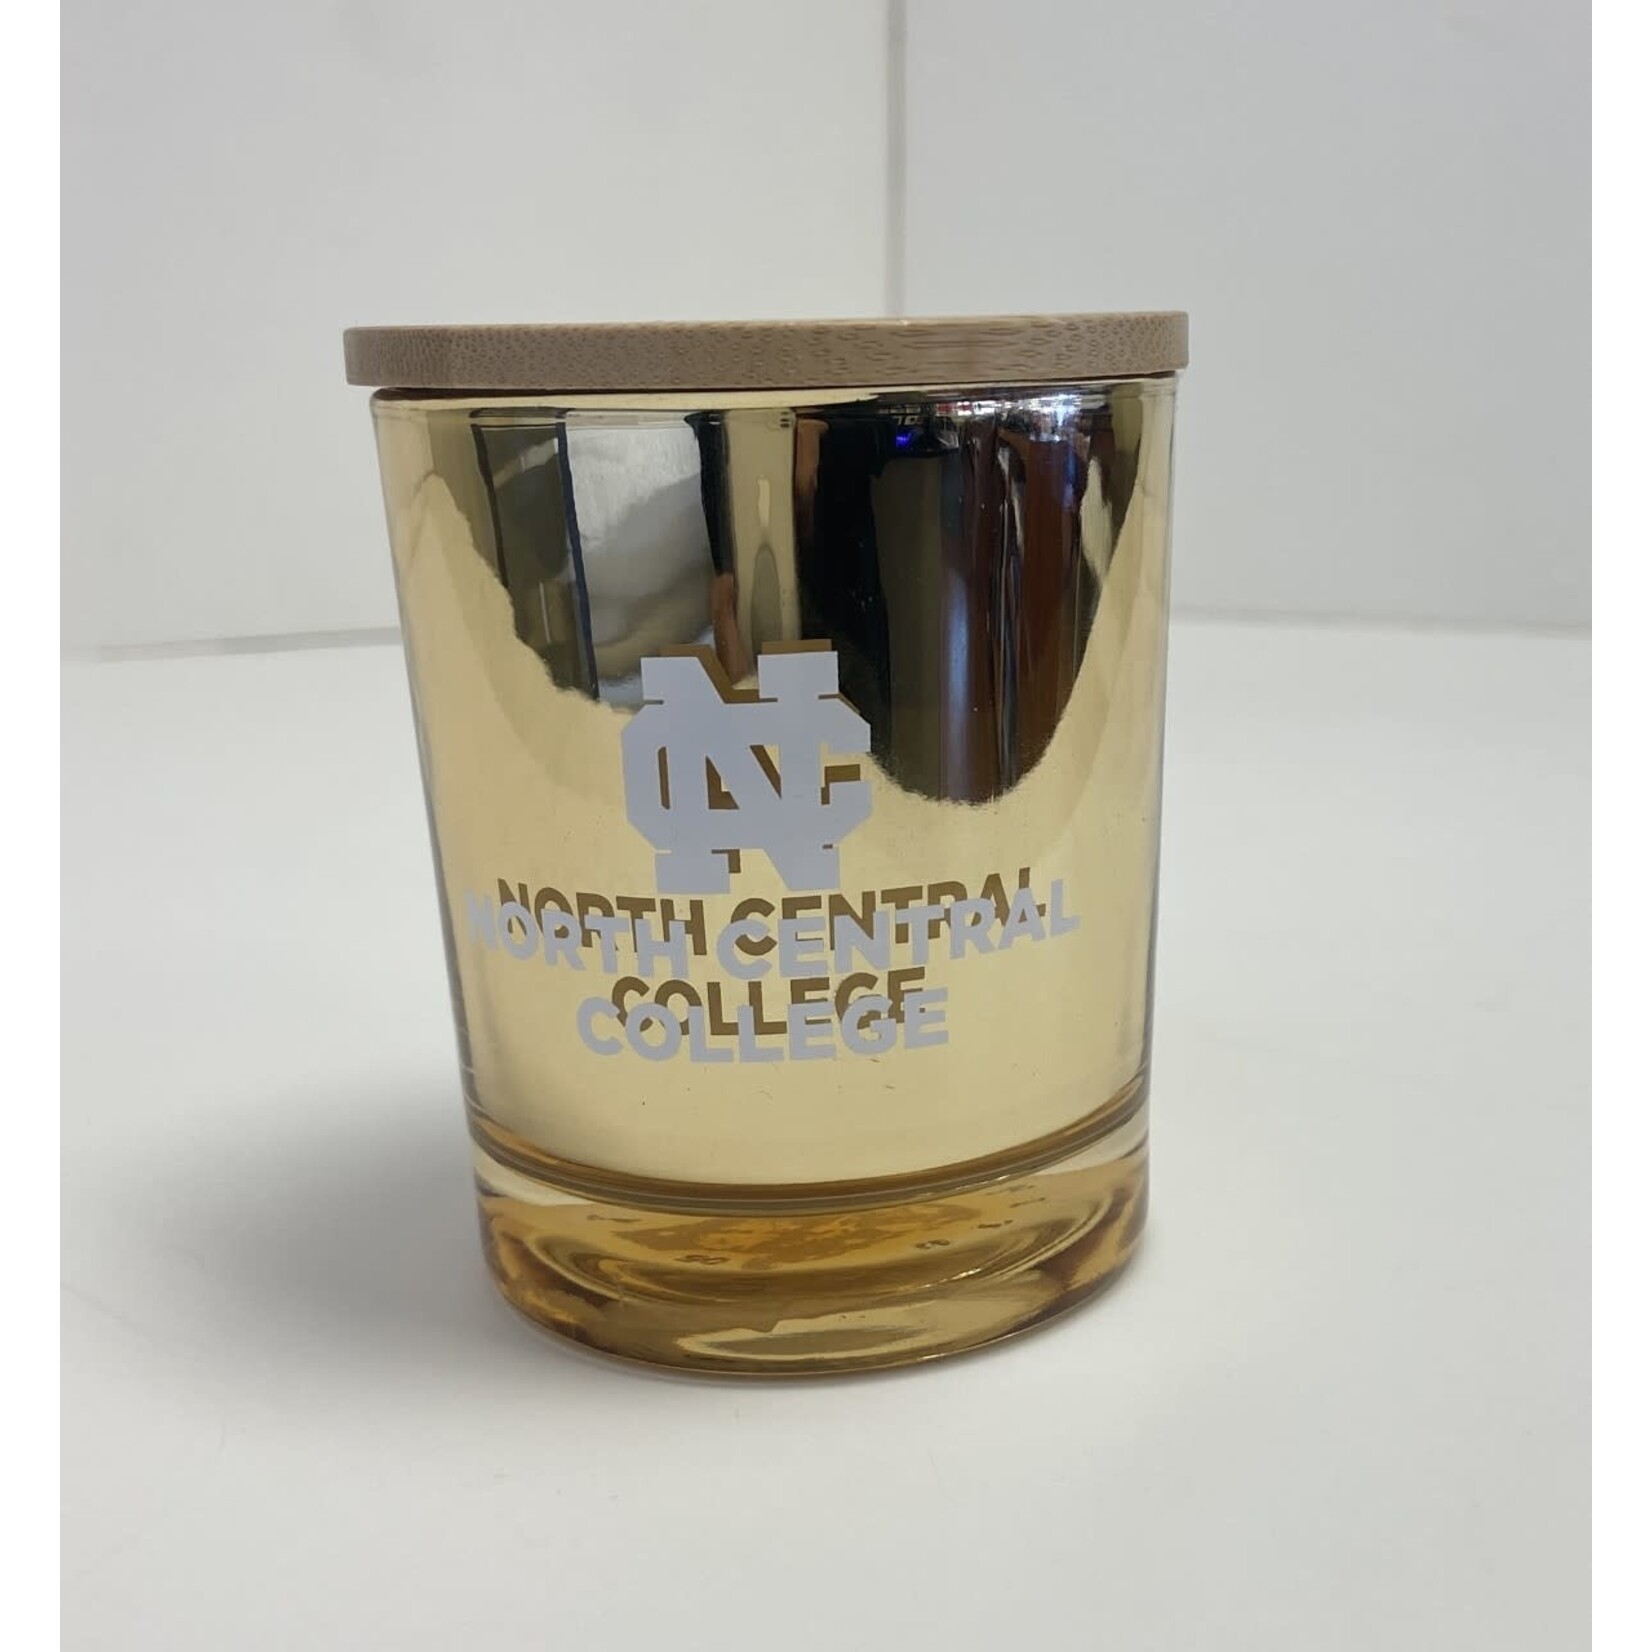 Neil Enterprises North Central College Bamboo Soy candle